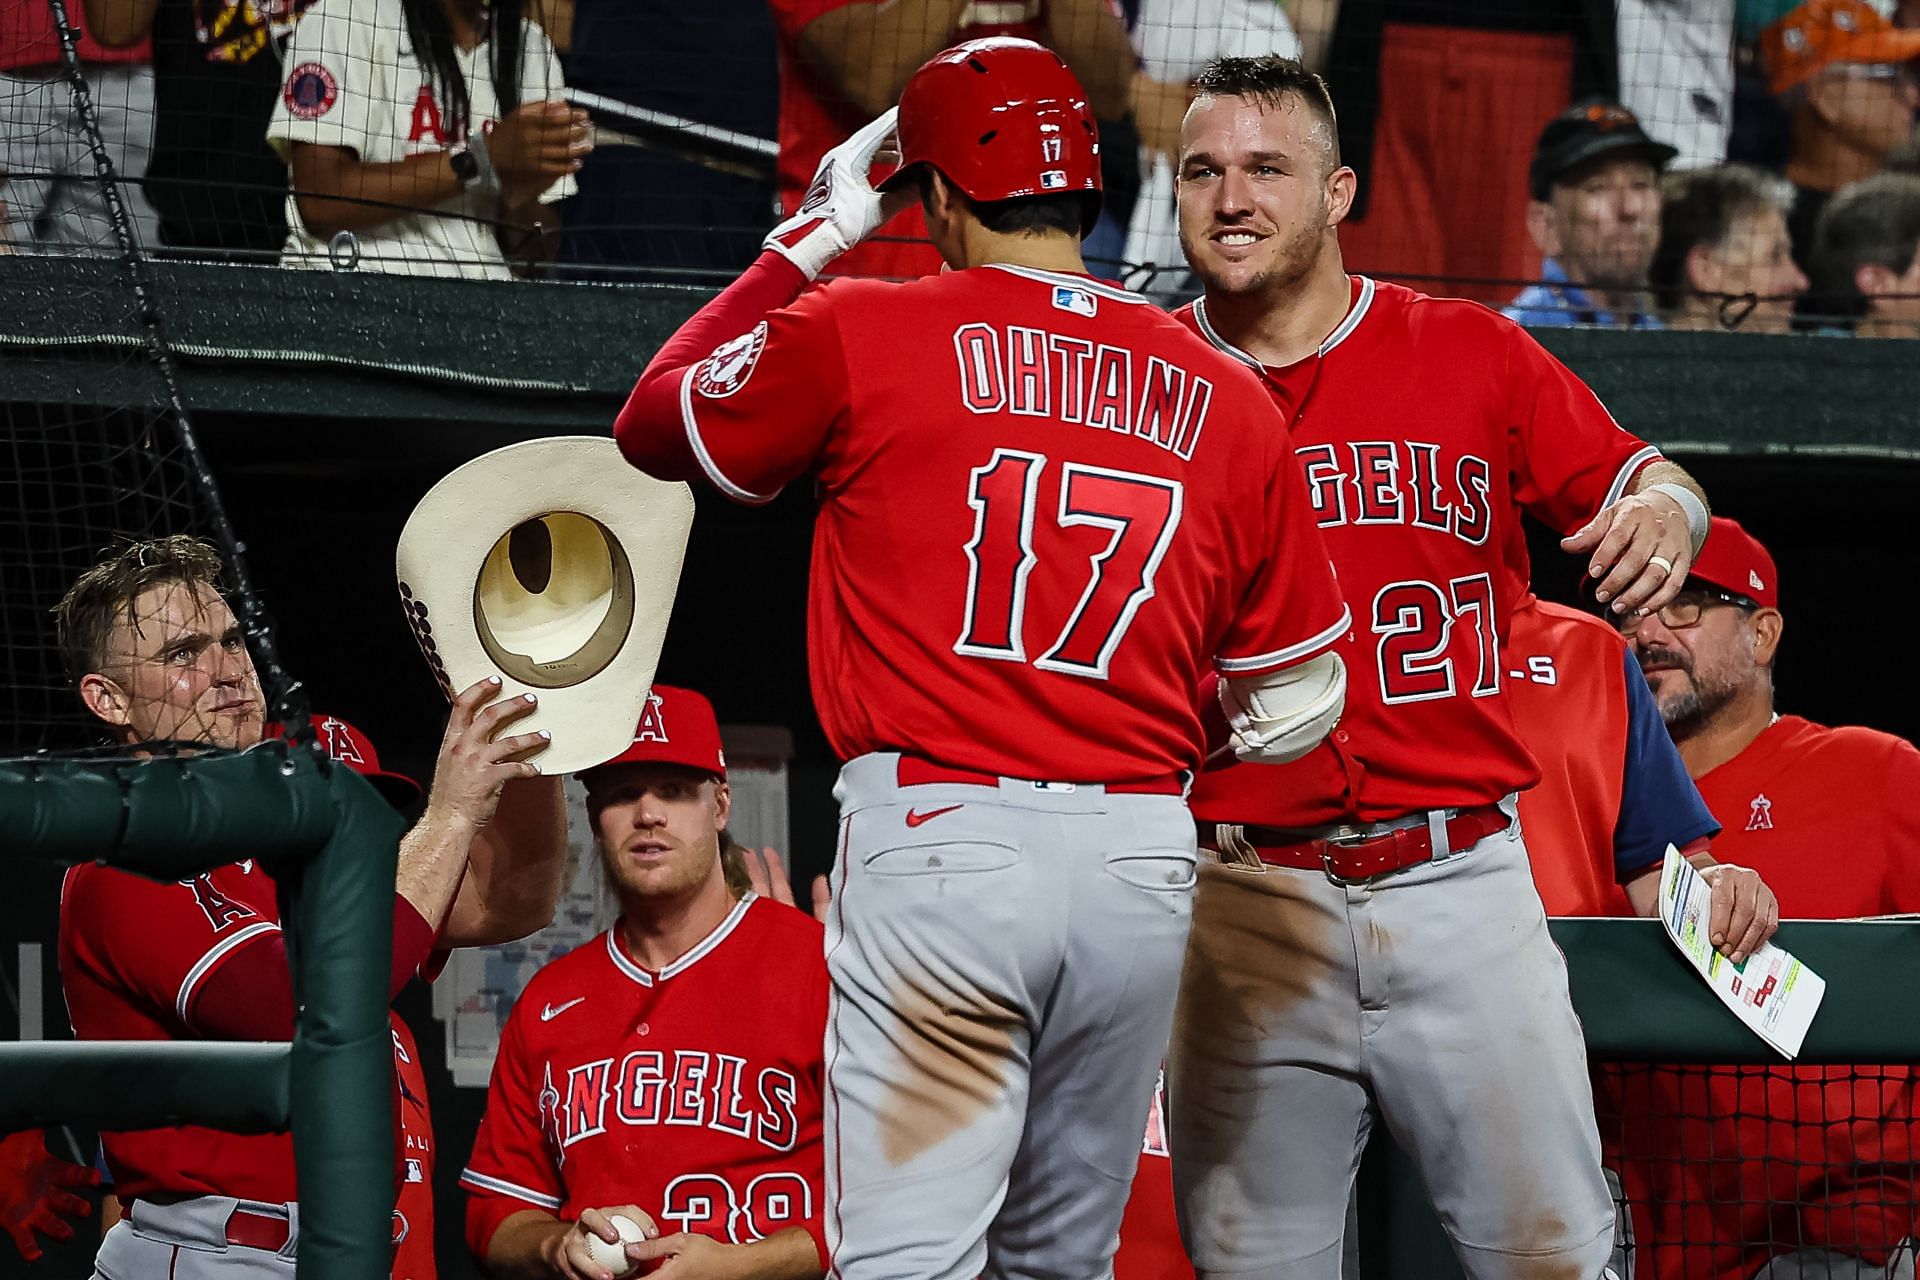 Mike Trout and Shohei Ohtani homer, but Angels lose in ninth - Los